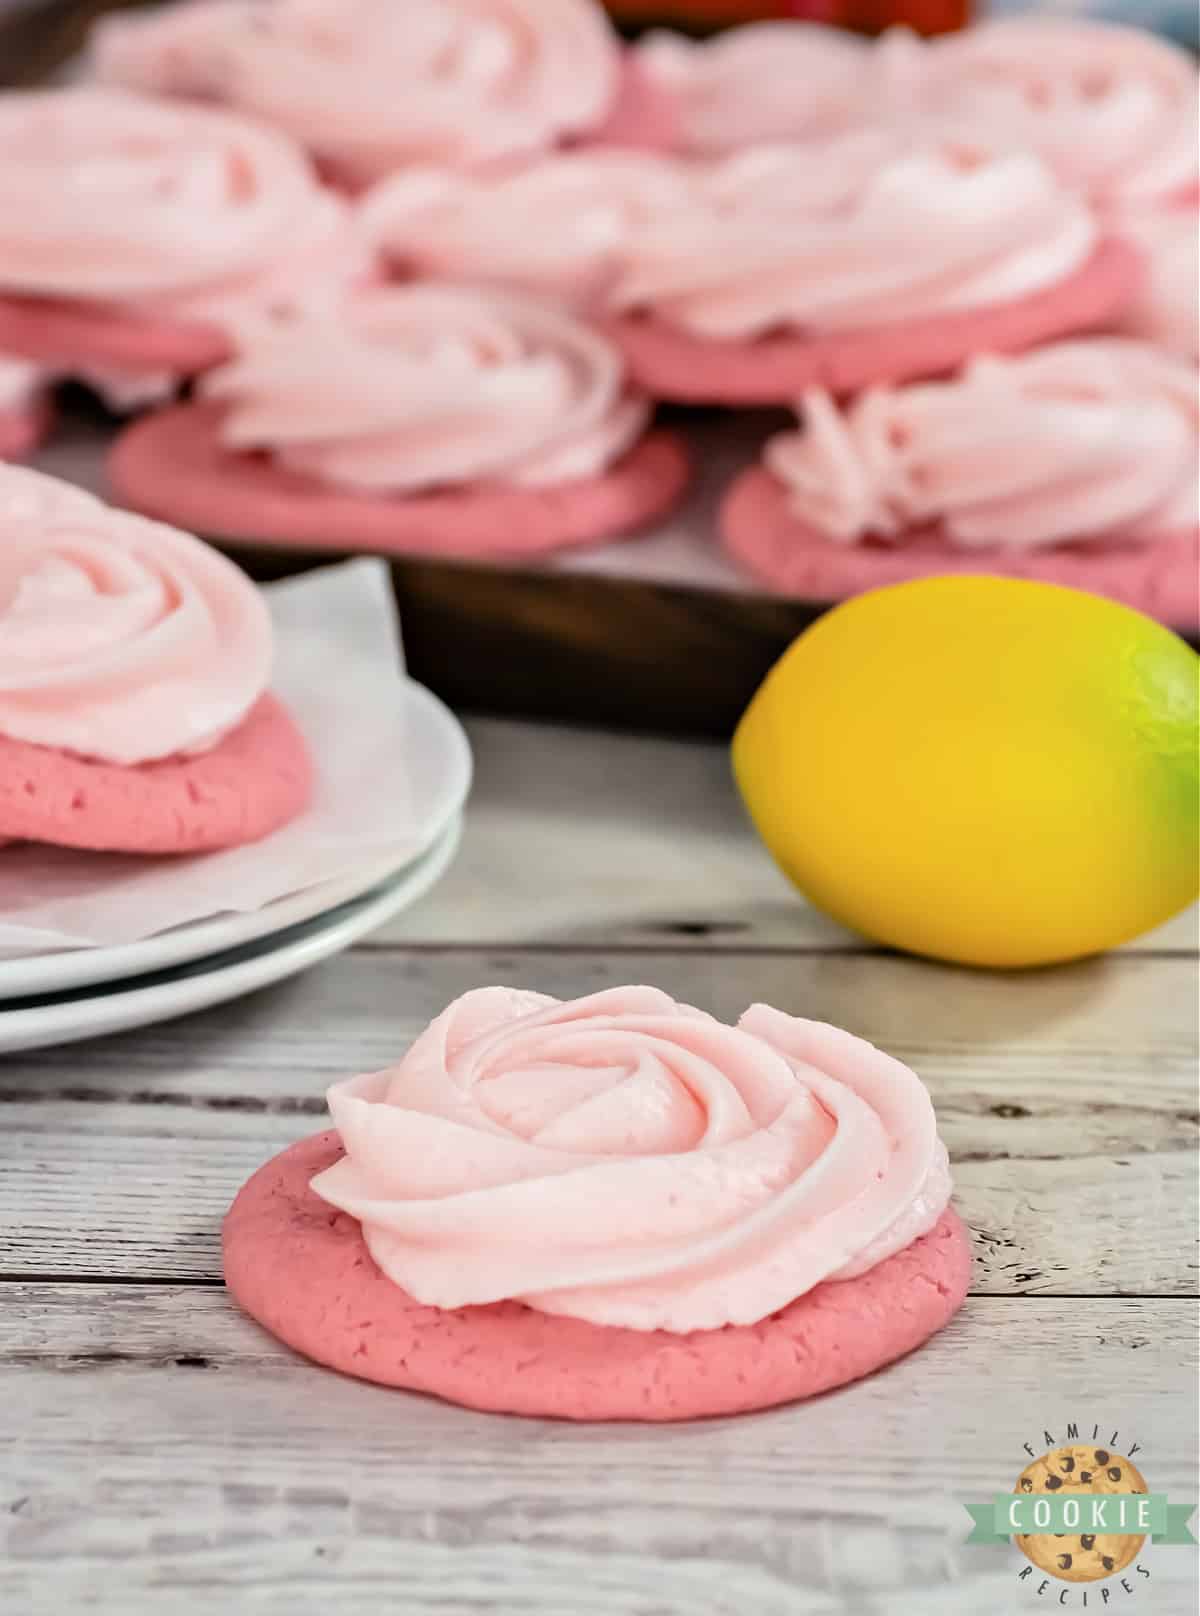 Pink Lemonade Cookies are soft, chewy, and packed with lemon flavor. Topped with a simple lemon frosting, these pink lemonade cookies are pretty, refreshing, and delicious. 